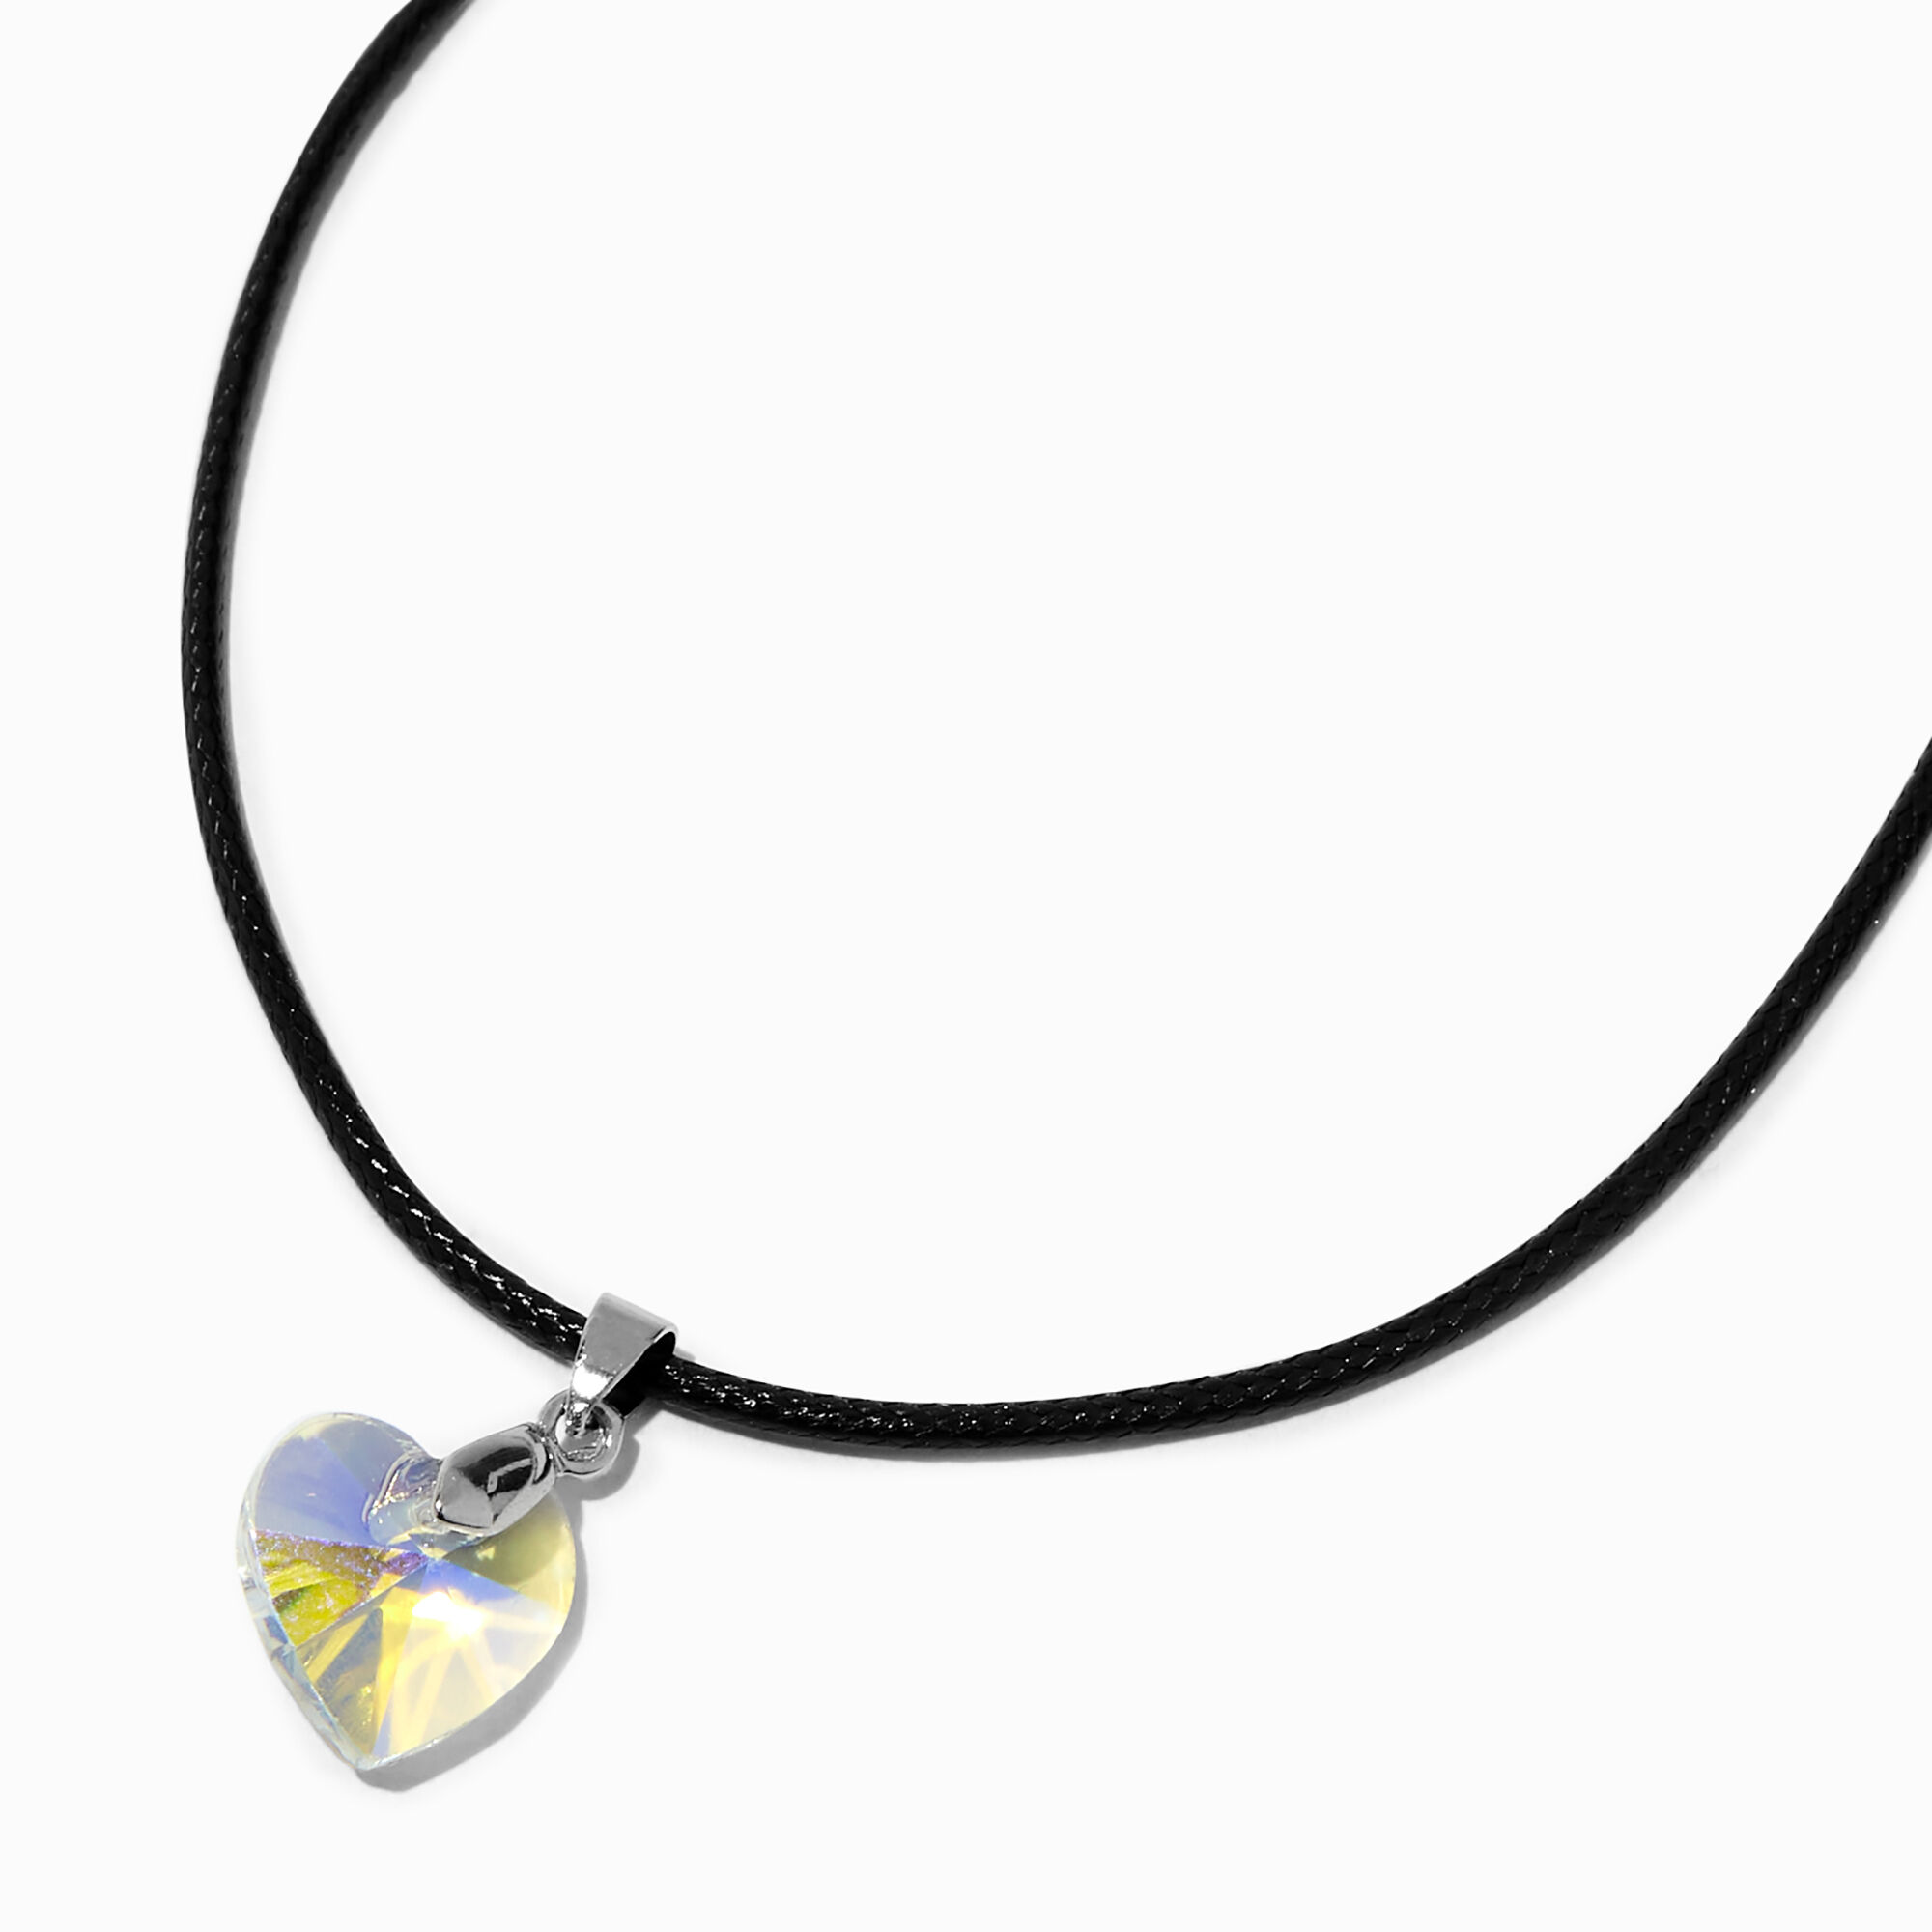 View Claires Iridescent Heart Cord Pendant Necklace Black information